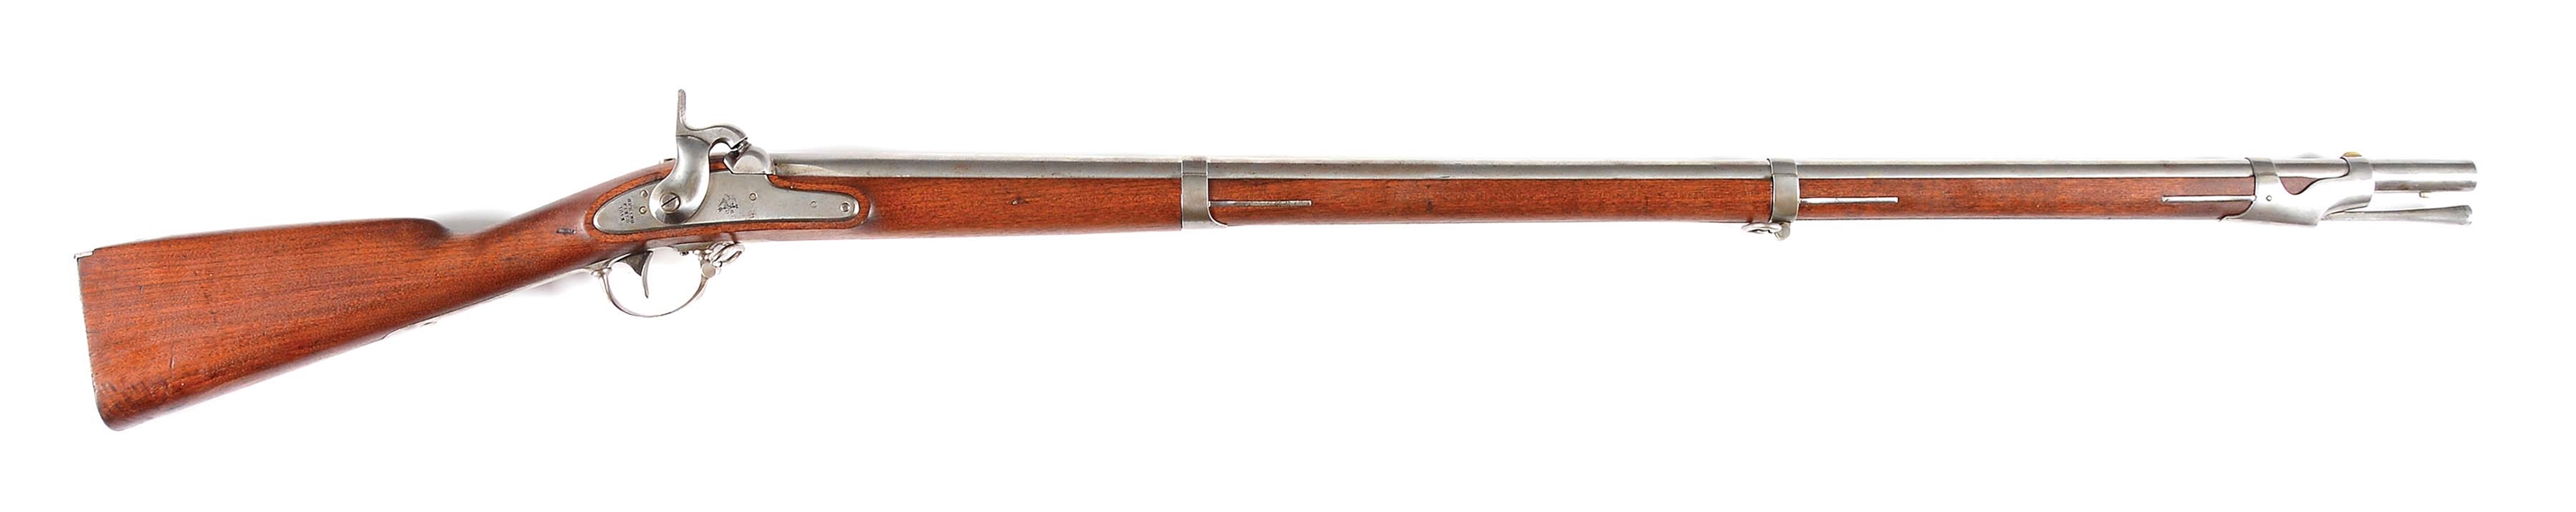 (A) US SPRINGFIELD M1842 PERCUSSION MUSKET DATED 1852. 